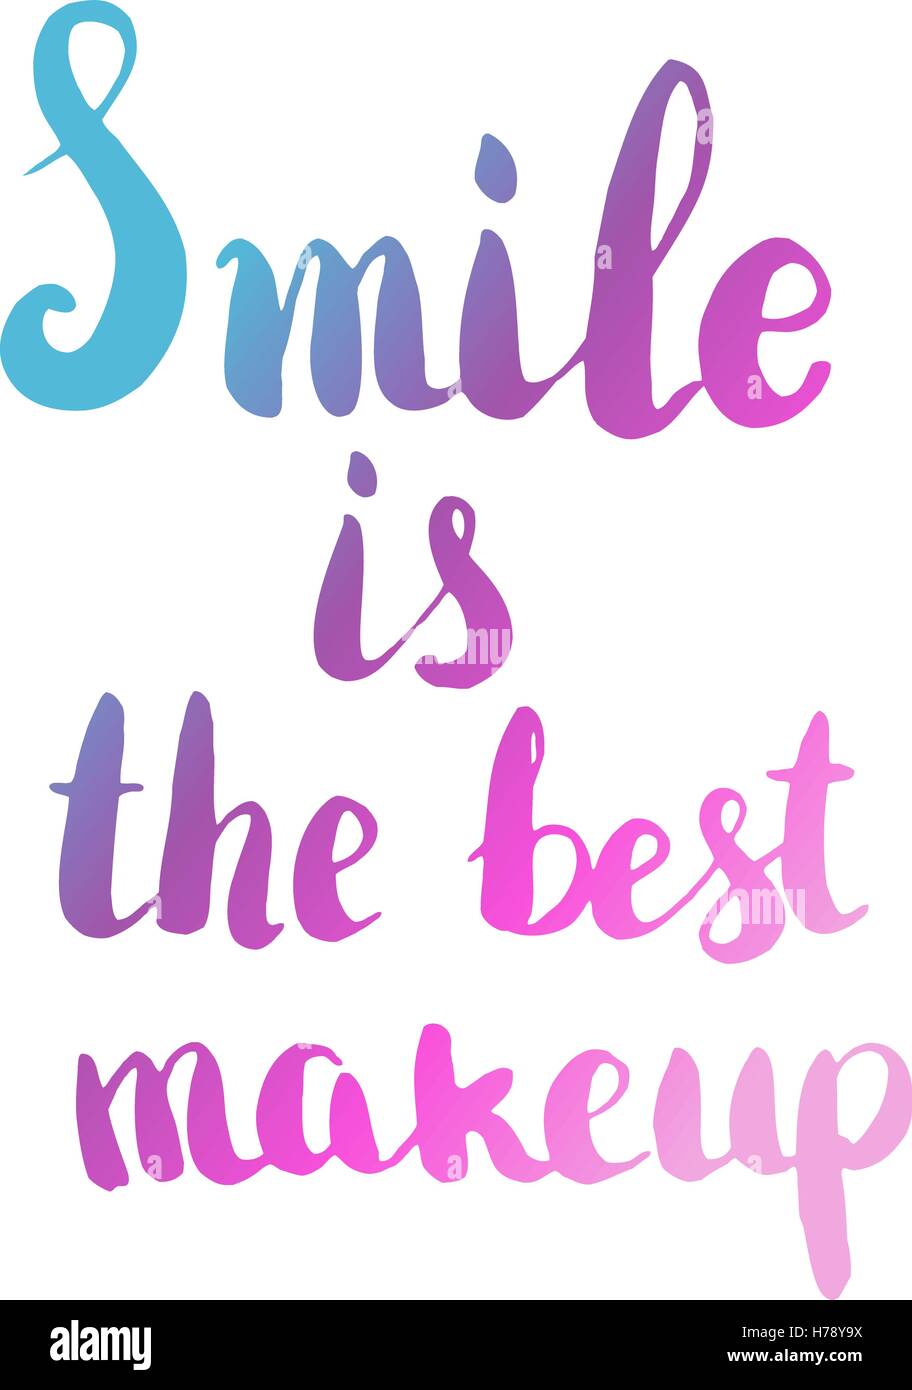 Smile is the best makeup. Hand drawn lettering isolated on white background. Design element for greeting card. Stock Vector